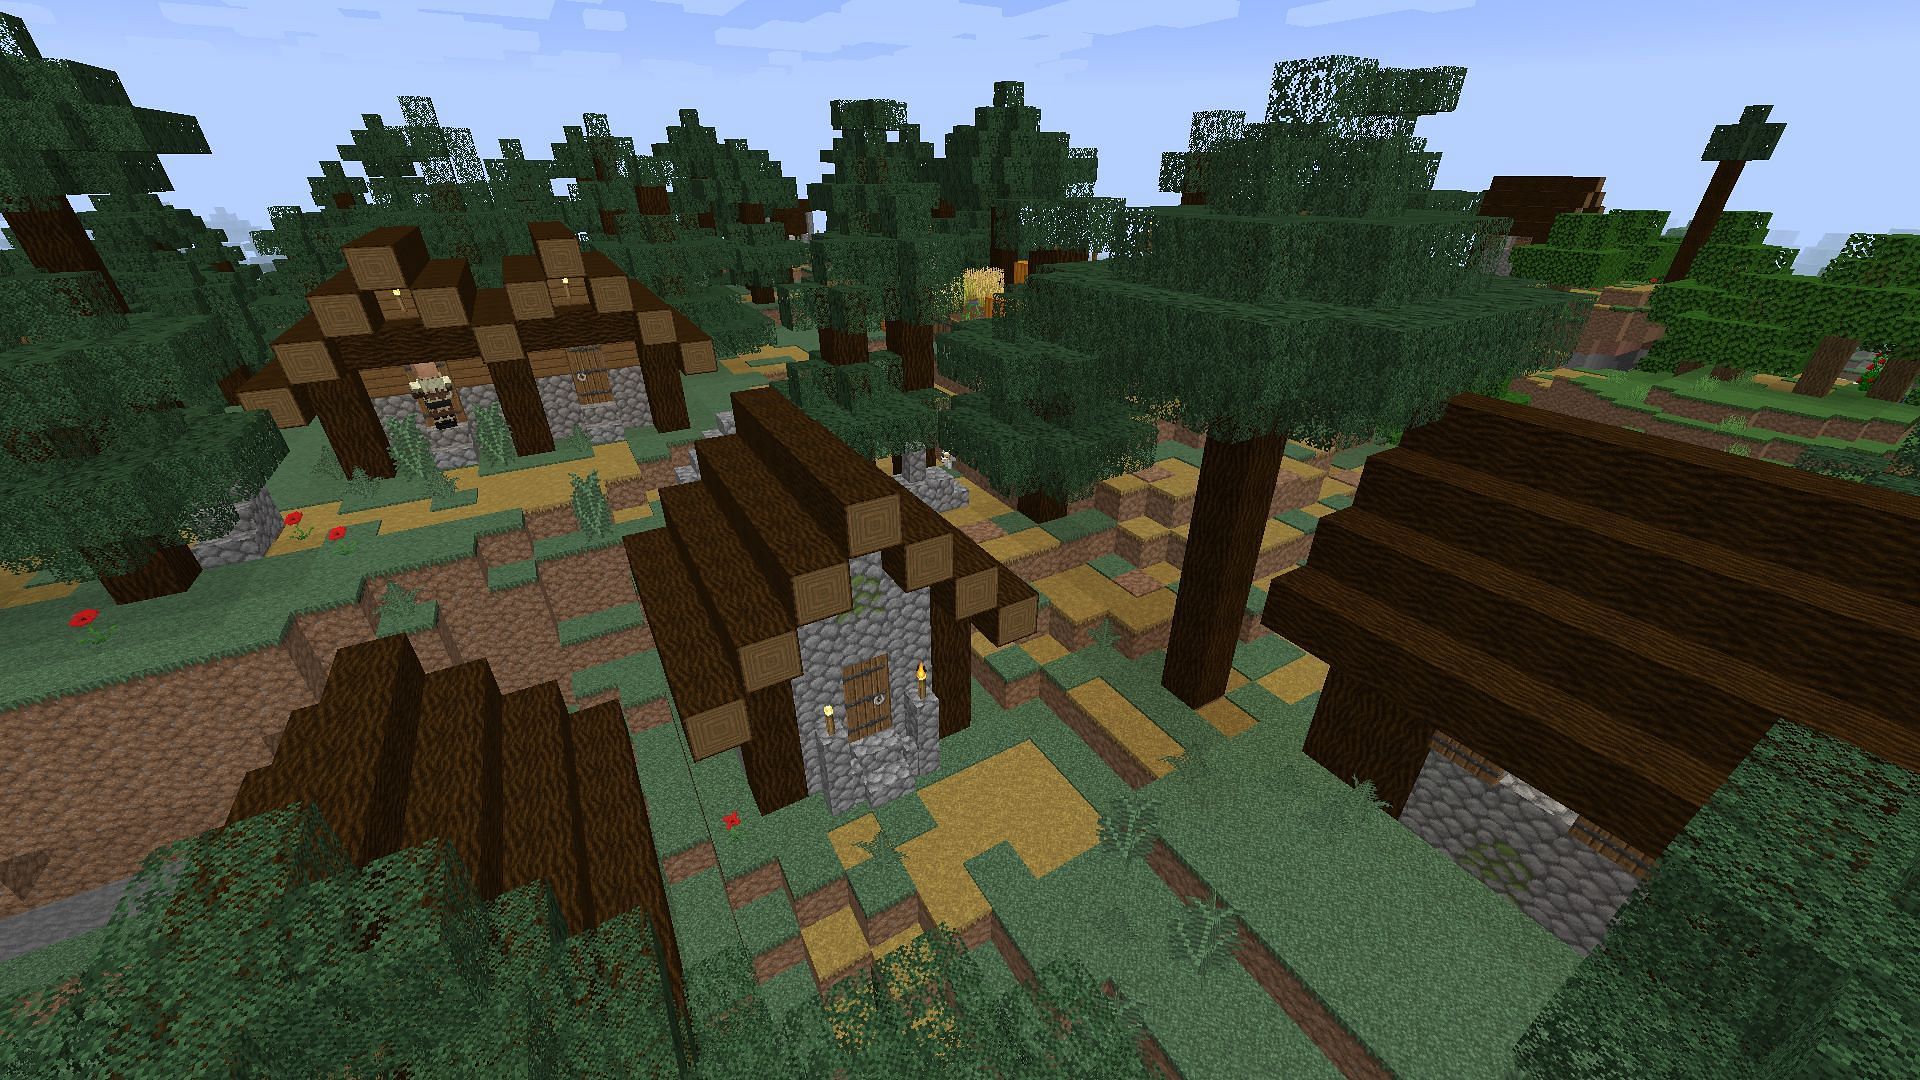 The village with the Depixel texture pack on (Image via Minecraft)